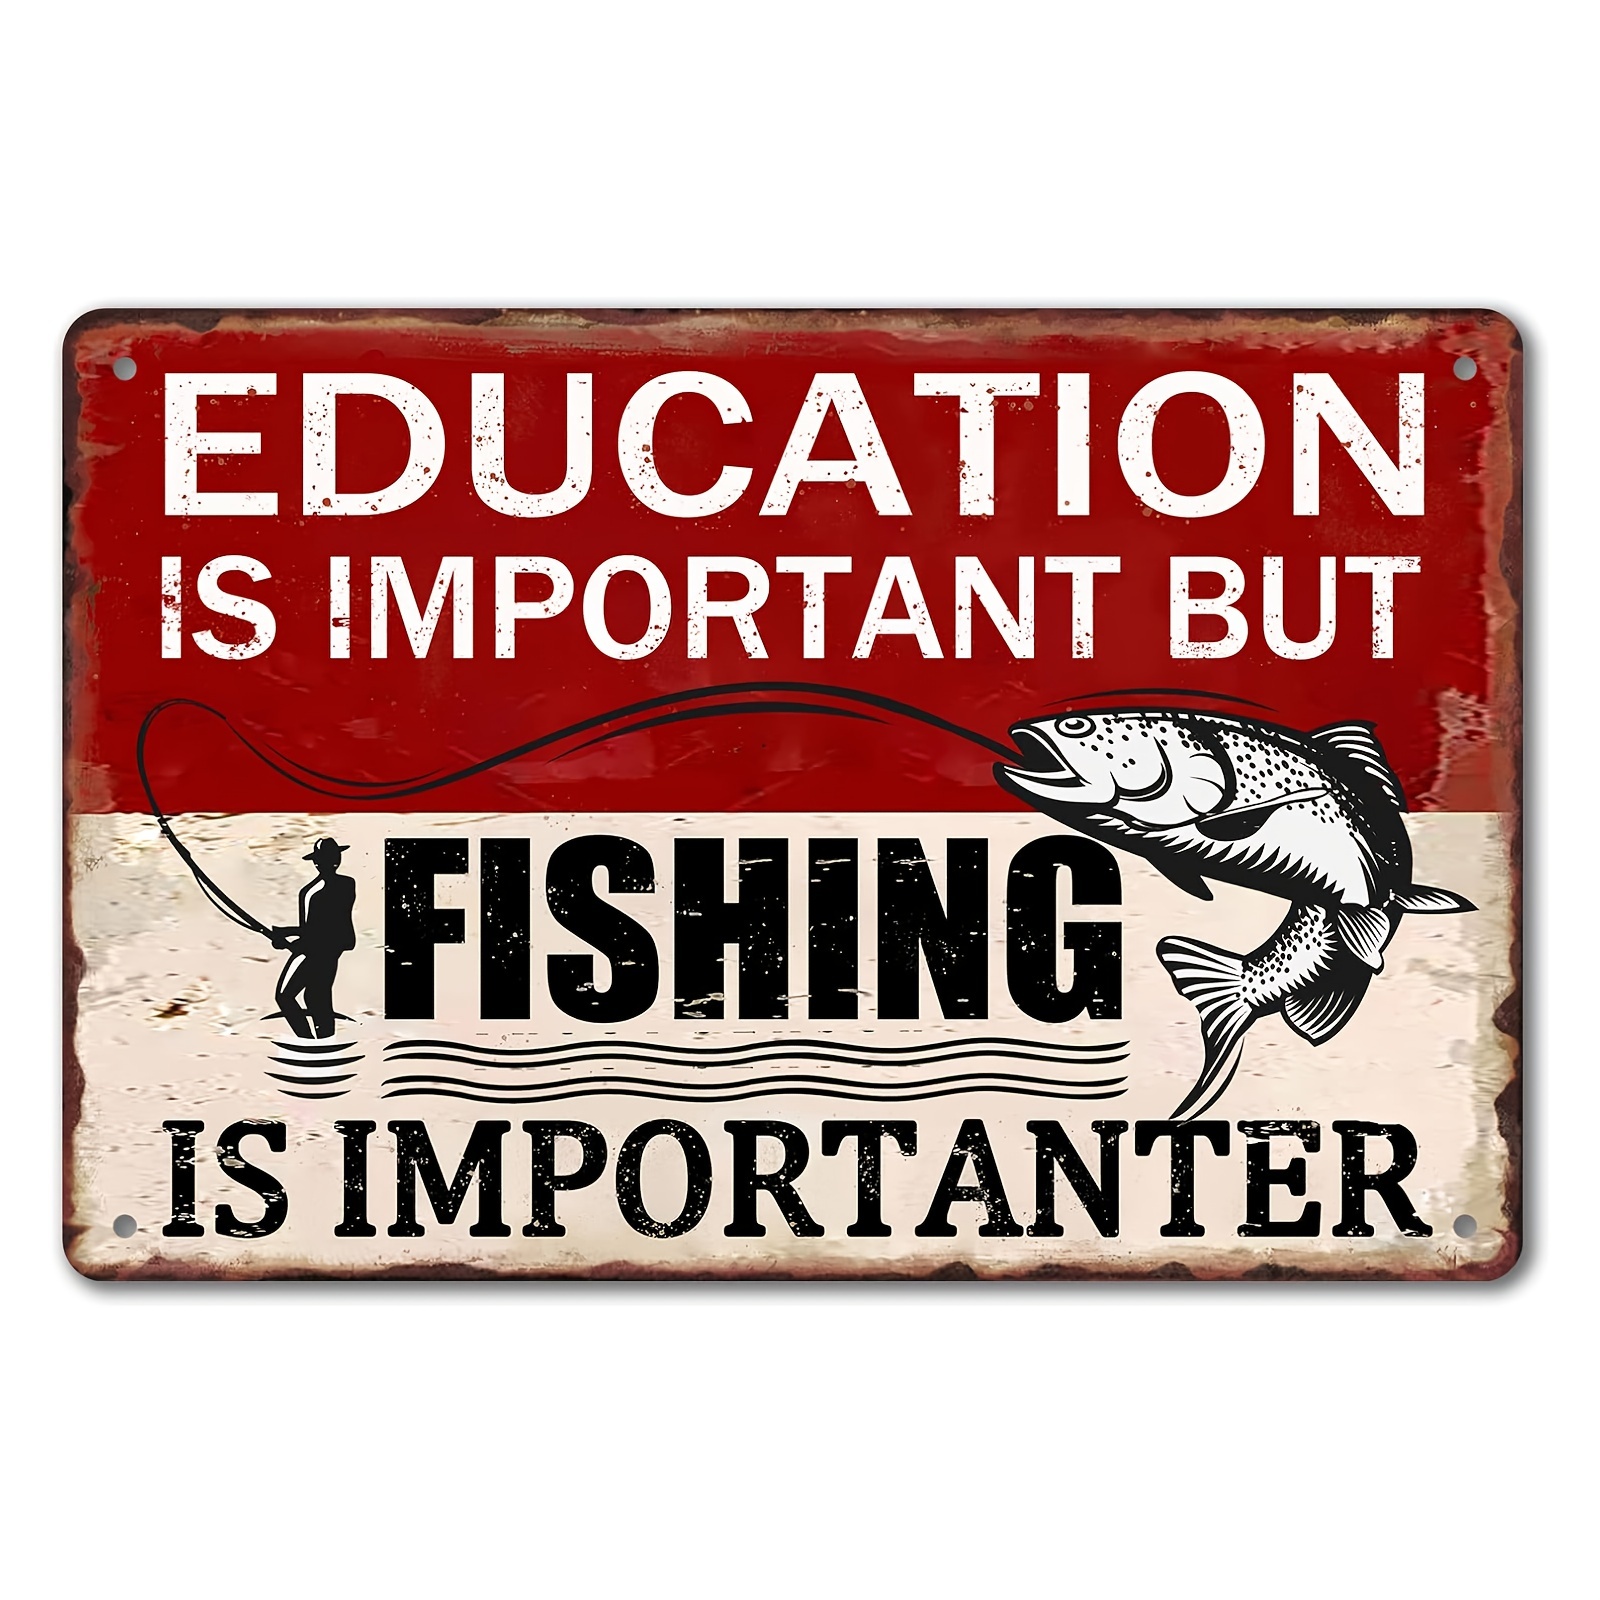 Funny Fishing Metal Tin Signs Vintage Fishing Sign Lake House Decor For  Home Education Is Important But Fishing Is Importanter Sign 8x12 Inches